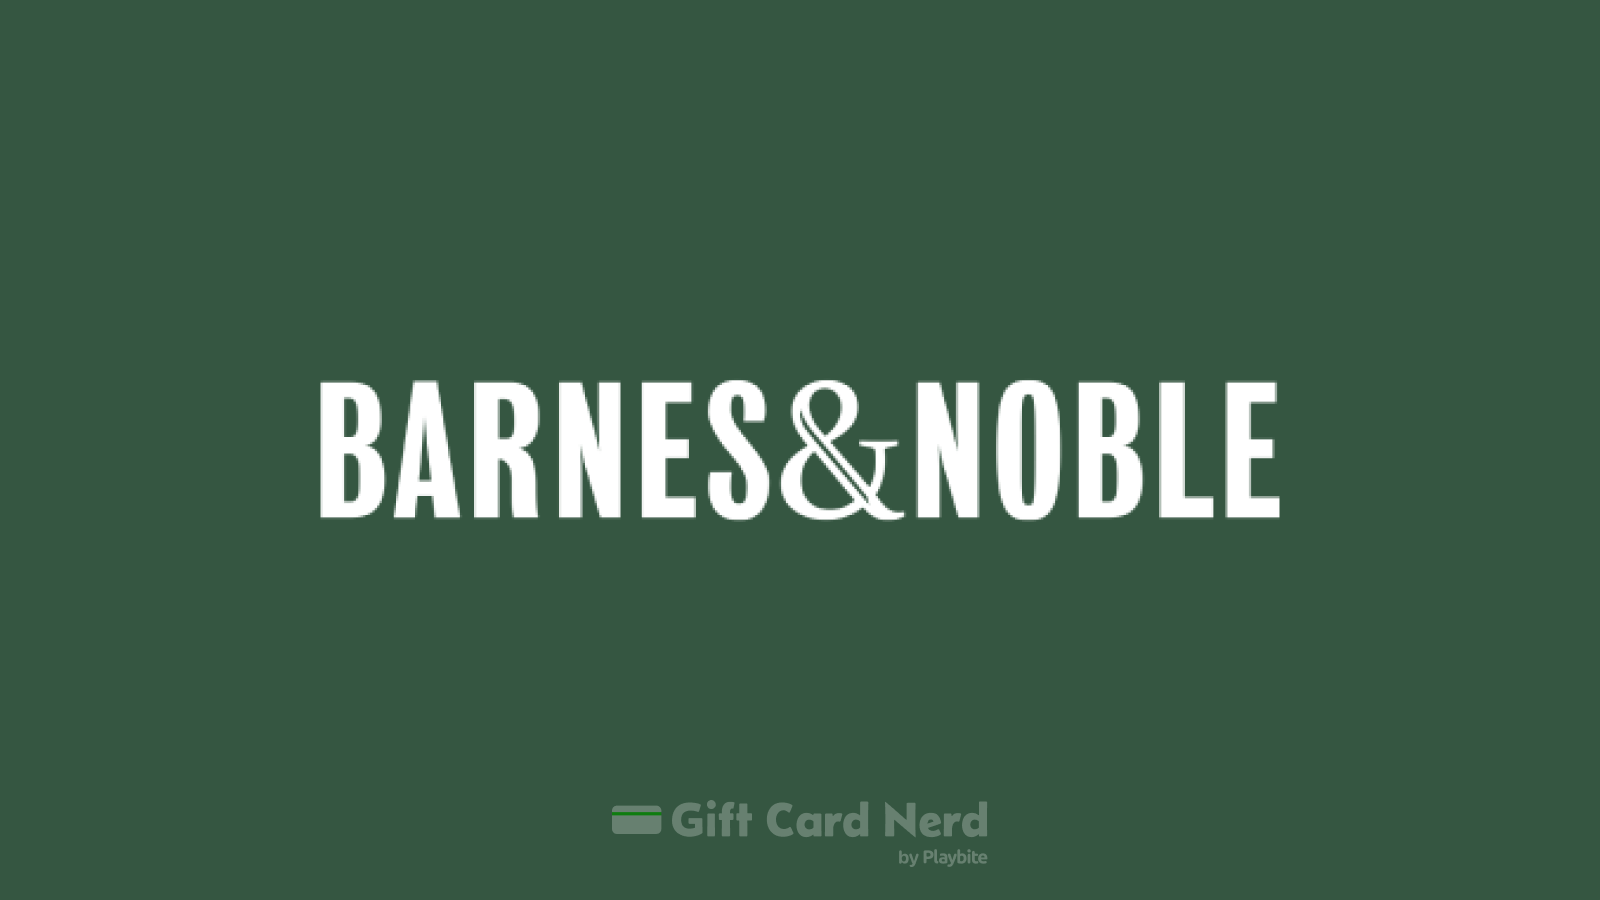 Can Barnes and Noble Gift Cards be Used on Cash App?